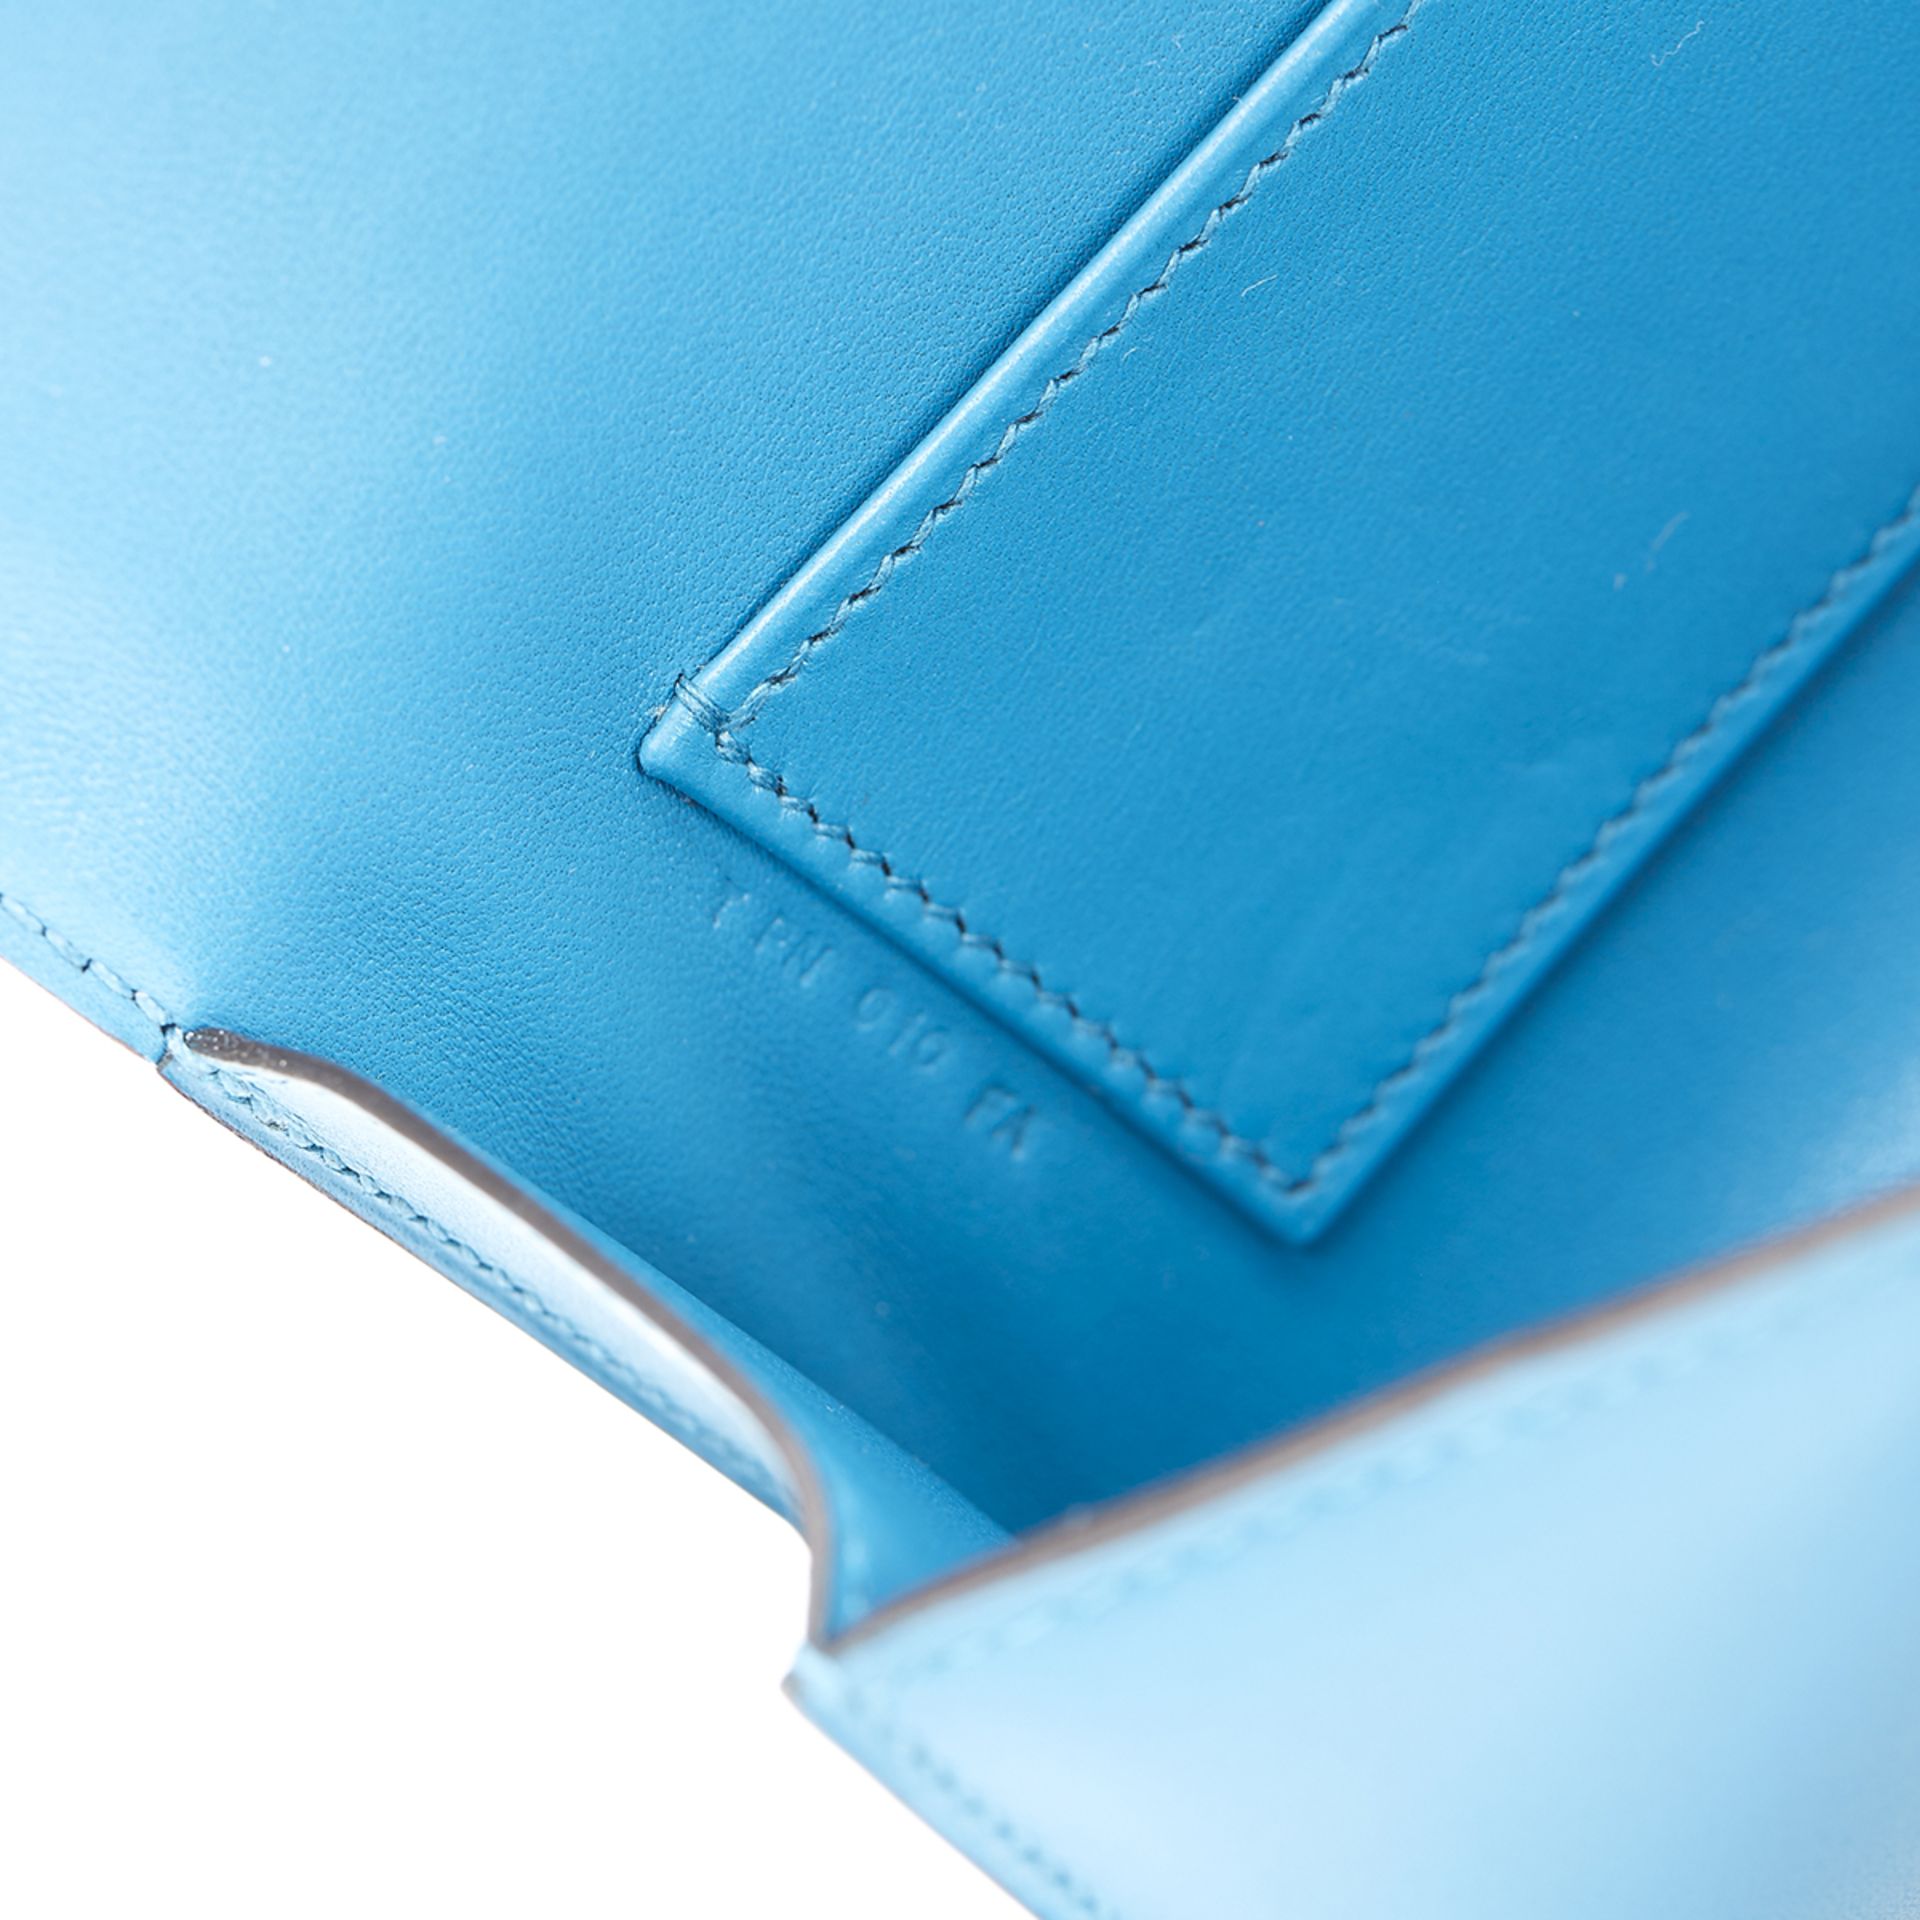 HERMES Egee , - Blue Izmir Tadelakt Leather Egee Clutch   TYPE Clutch SERIAL NUMBER T YEAR - Image 7 of 9